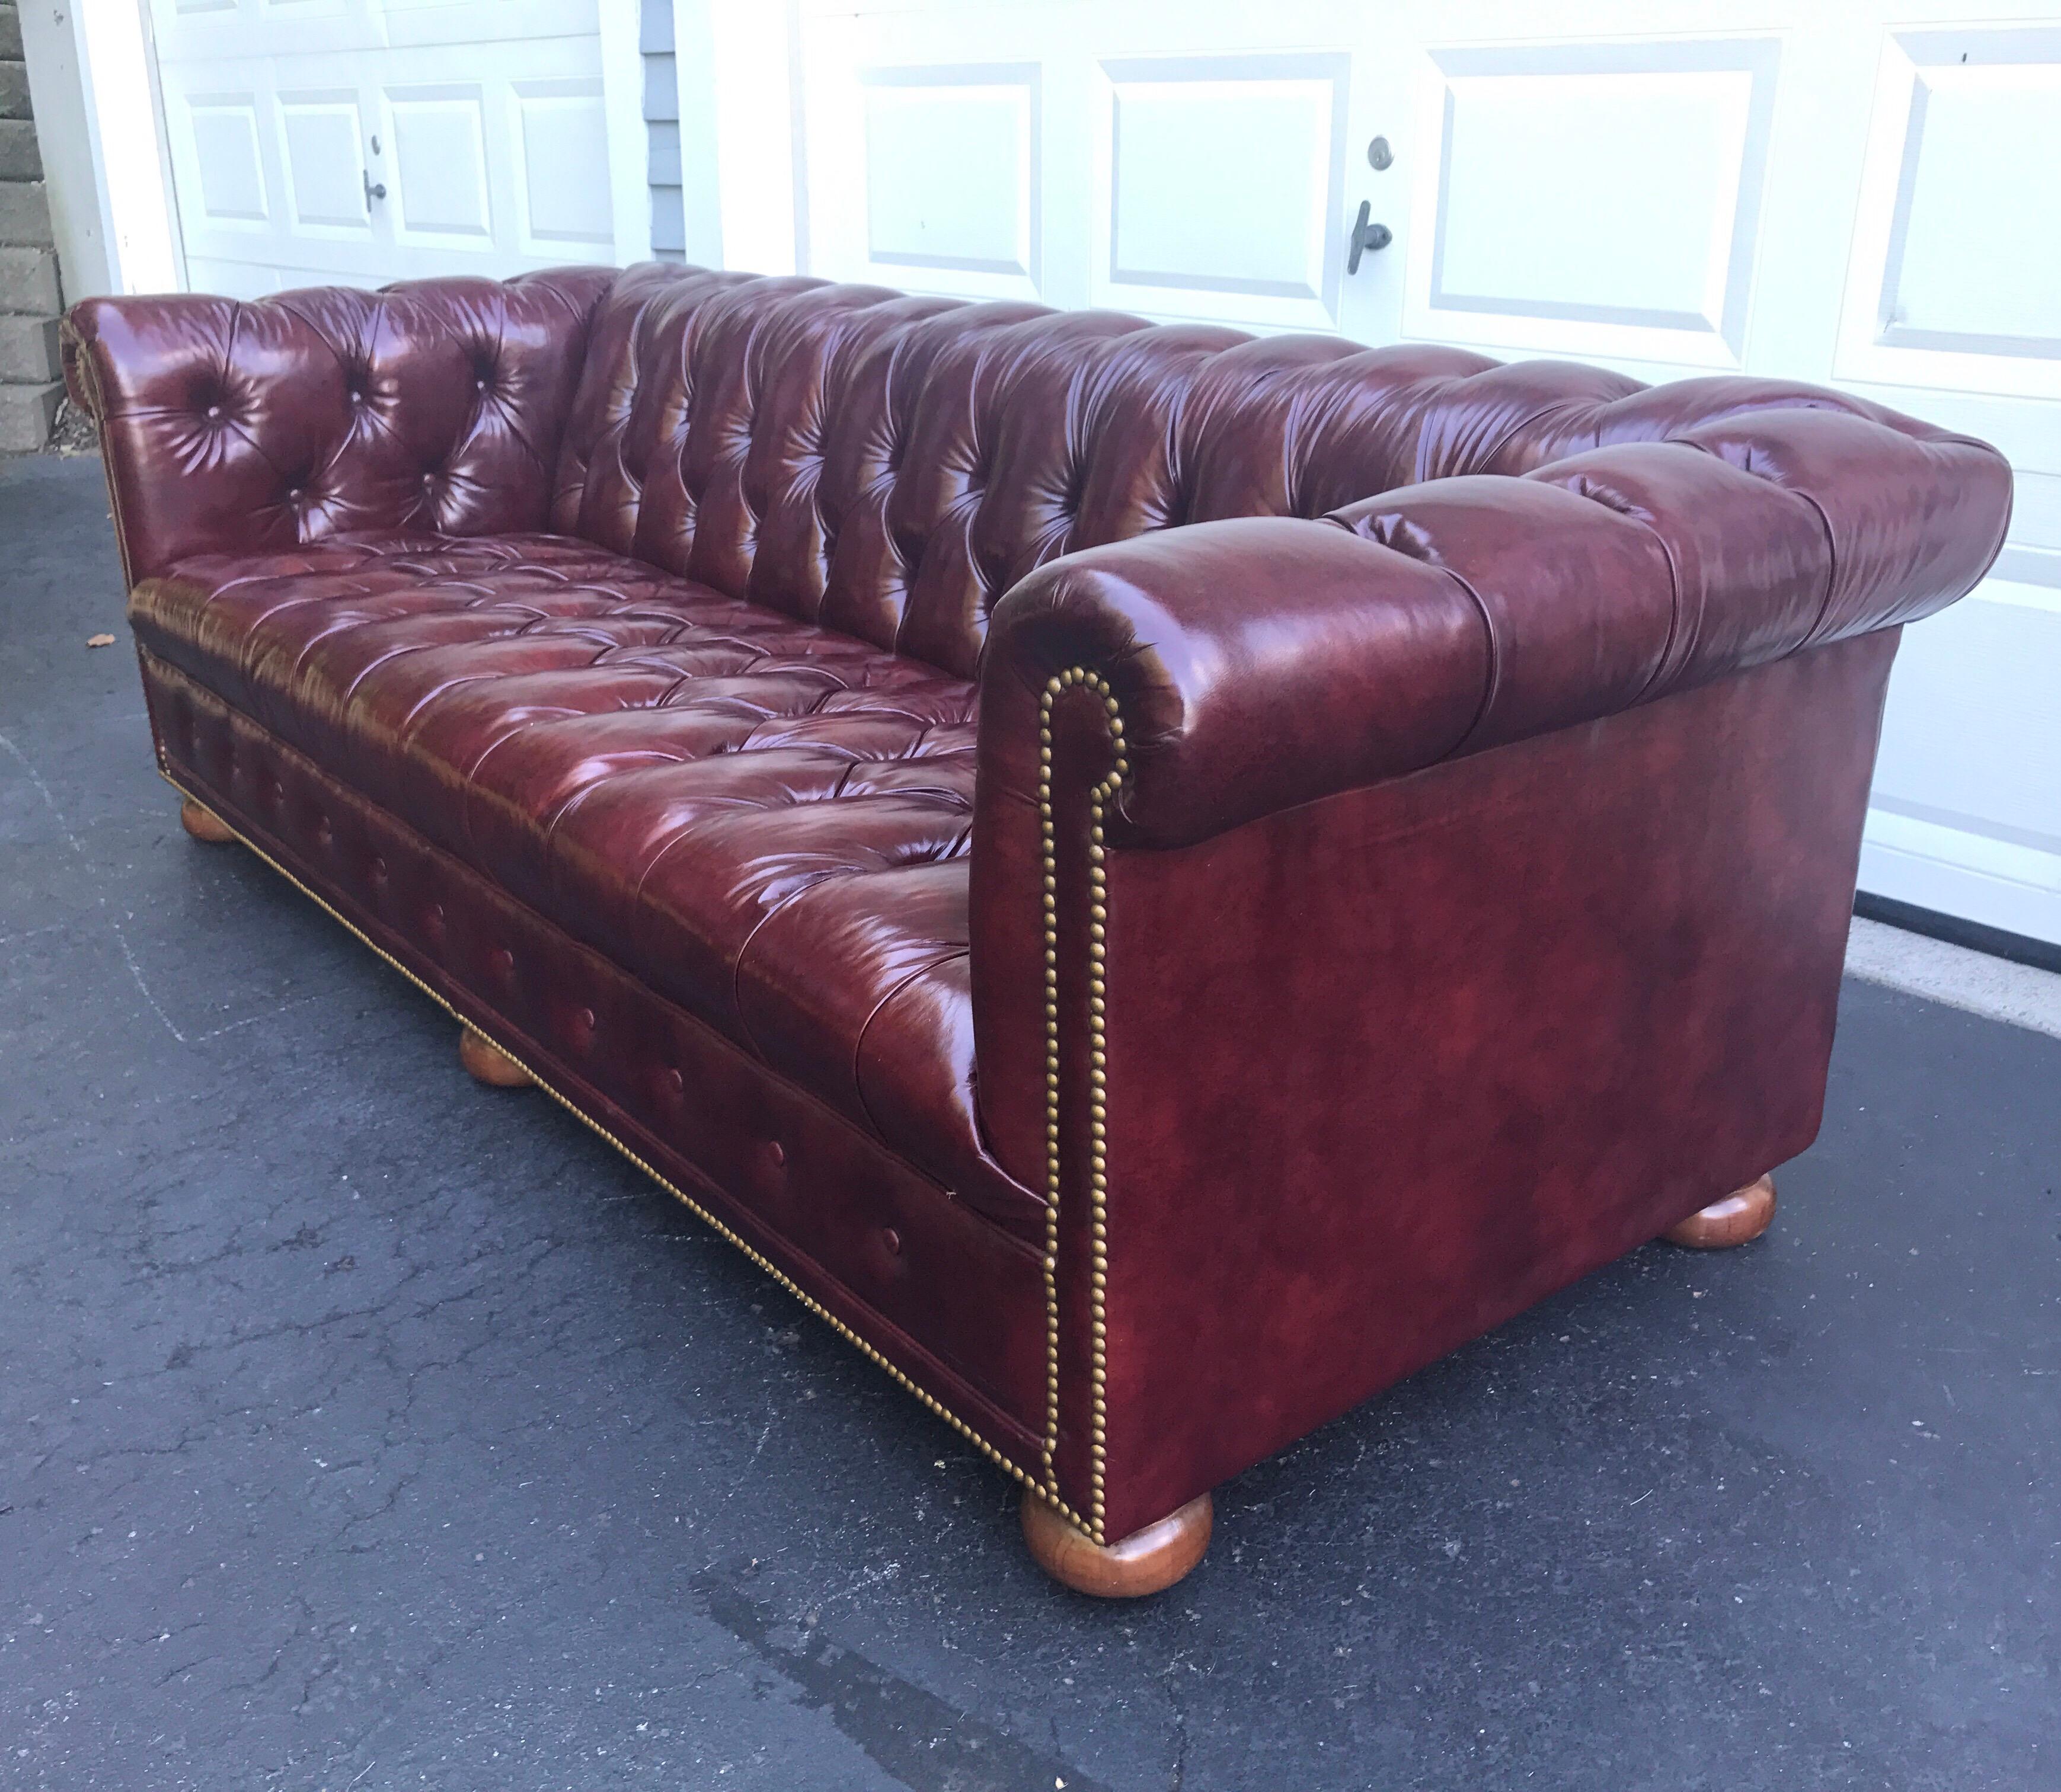 Magnificent condition coveted oxblood merlot leather chesterfield sofa with brass nailheads.